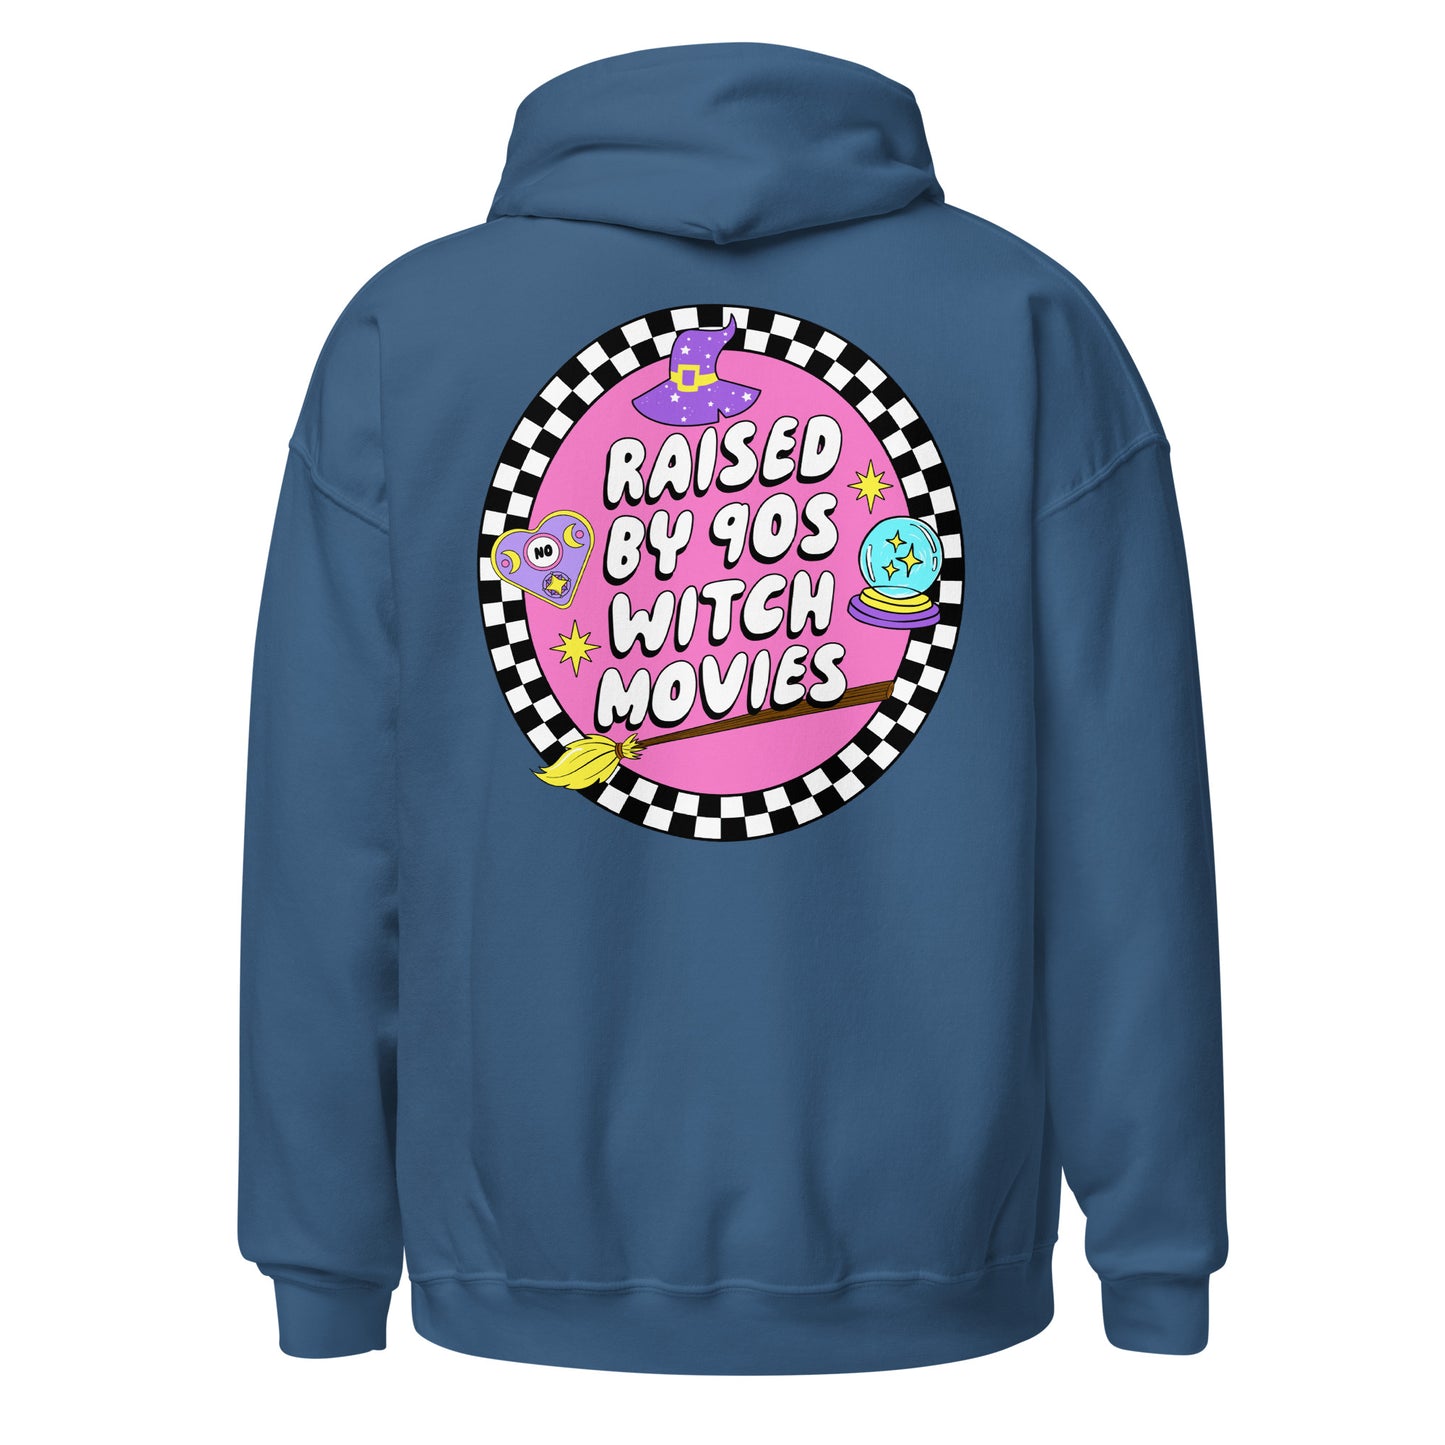 Raised on 90's Witch Movies Hoodie (front & back)